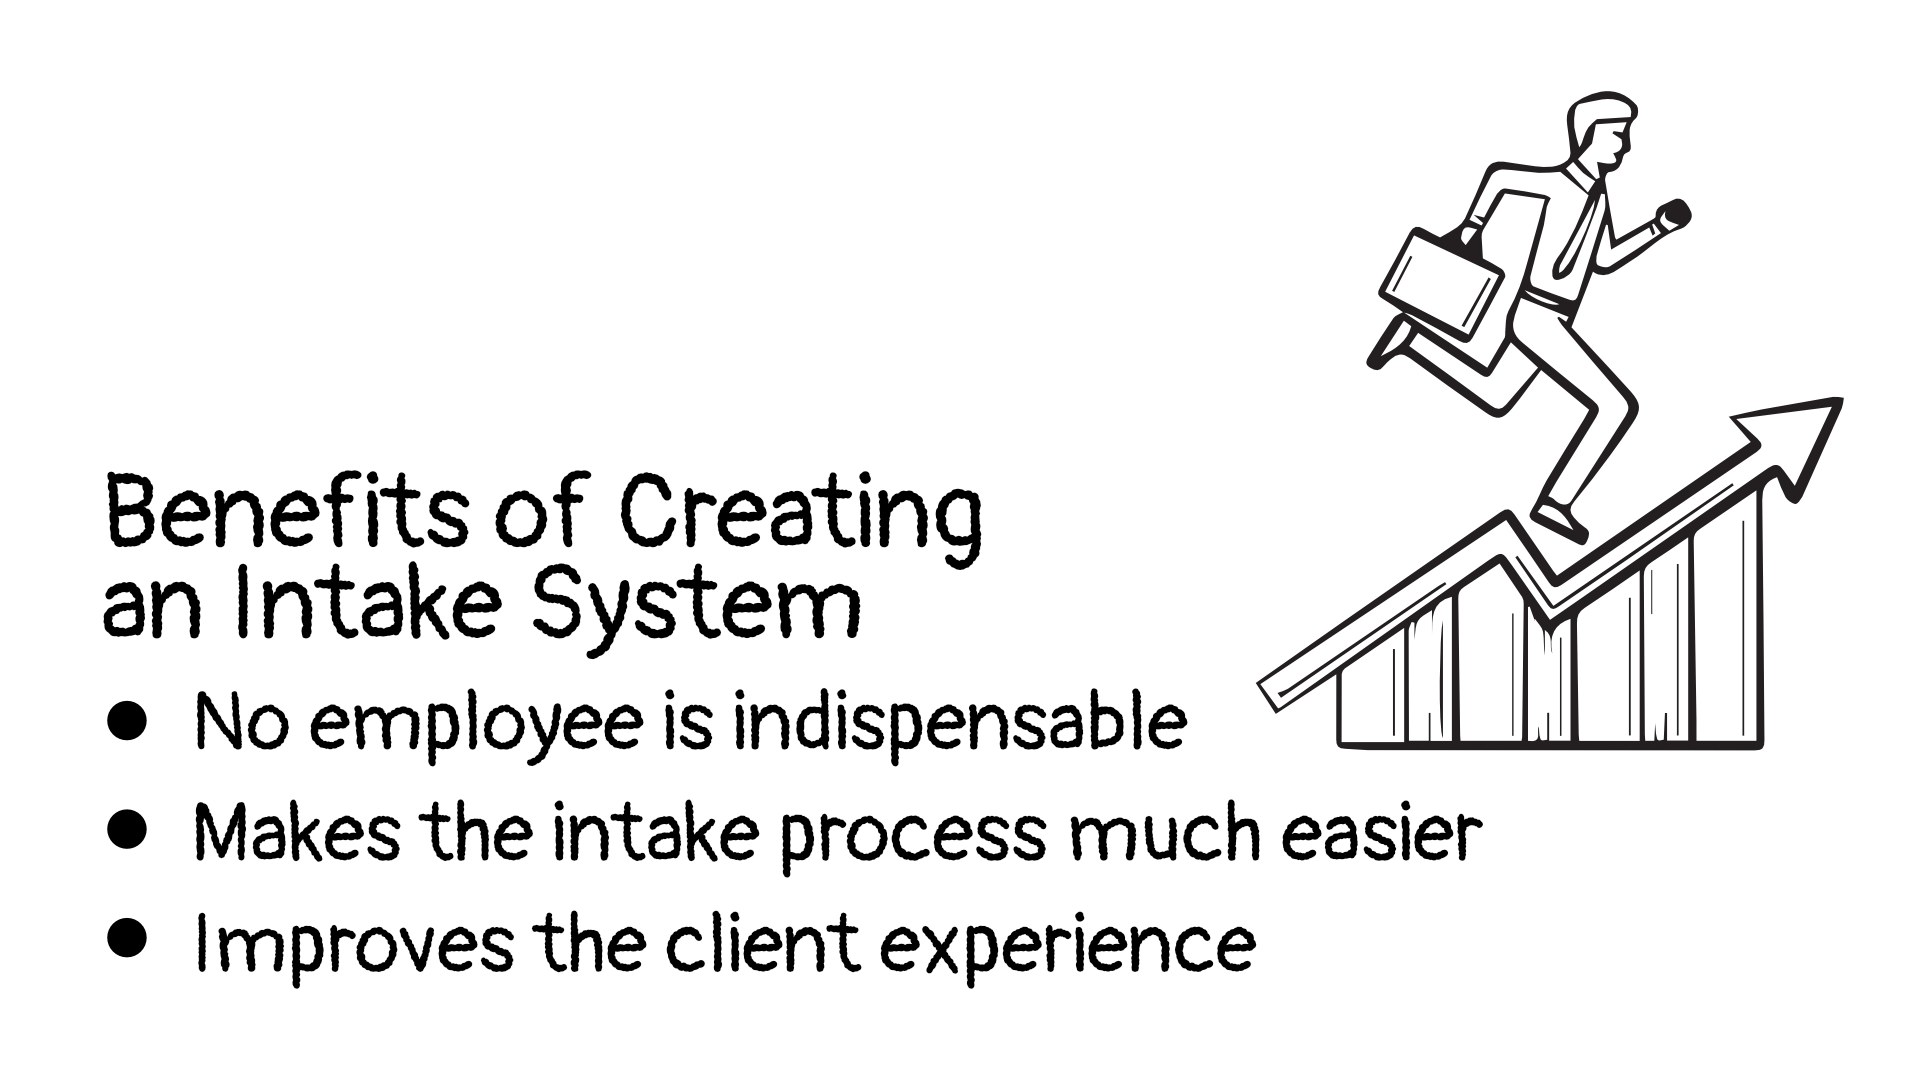 Client Intake: How To Improve Your Law Firm Intake Process